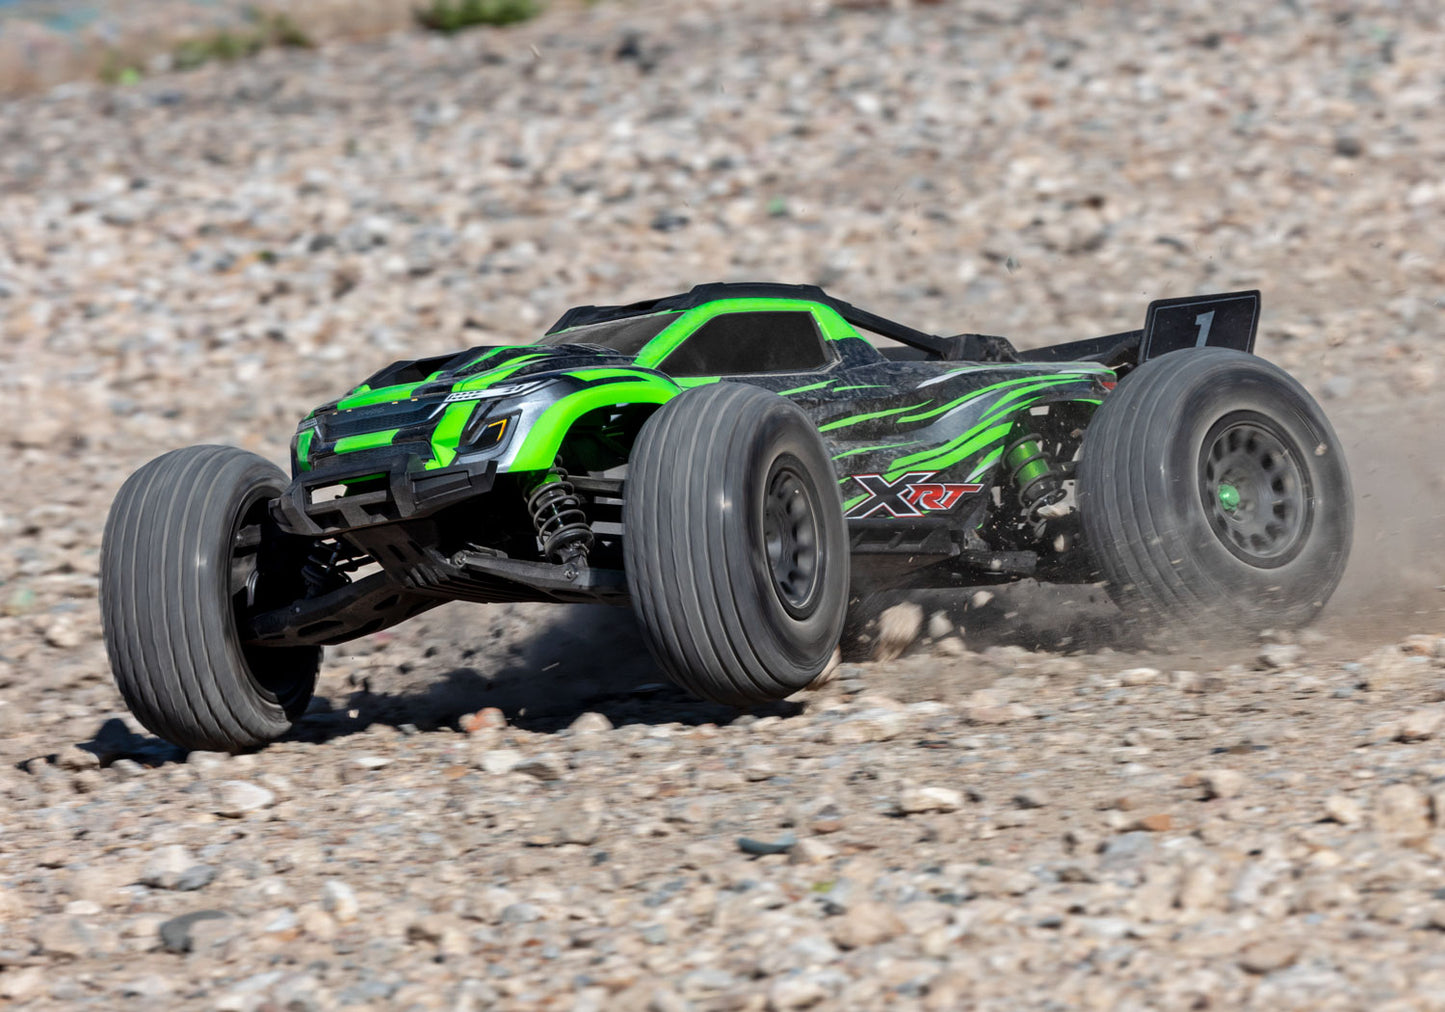 78086-4  XRT Brushless Electric Race Truck Green